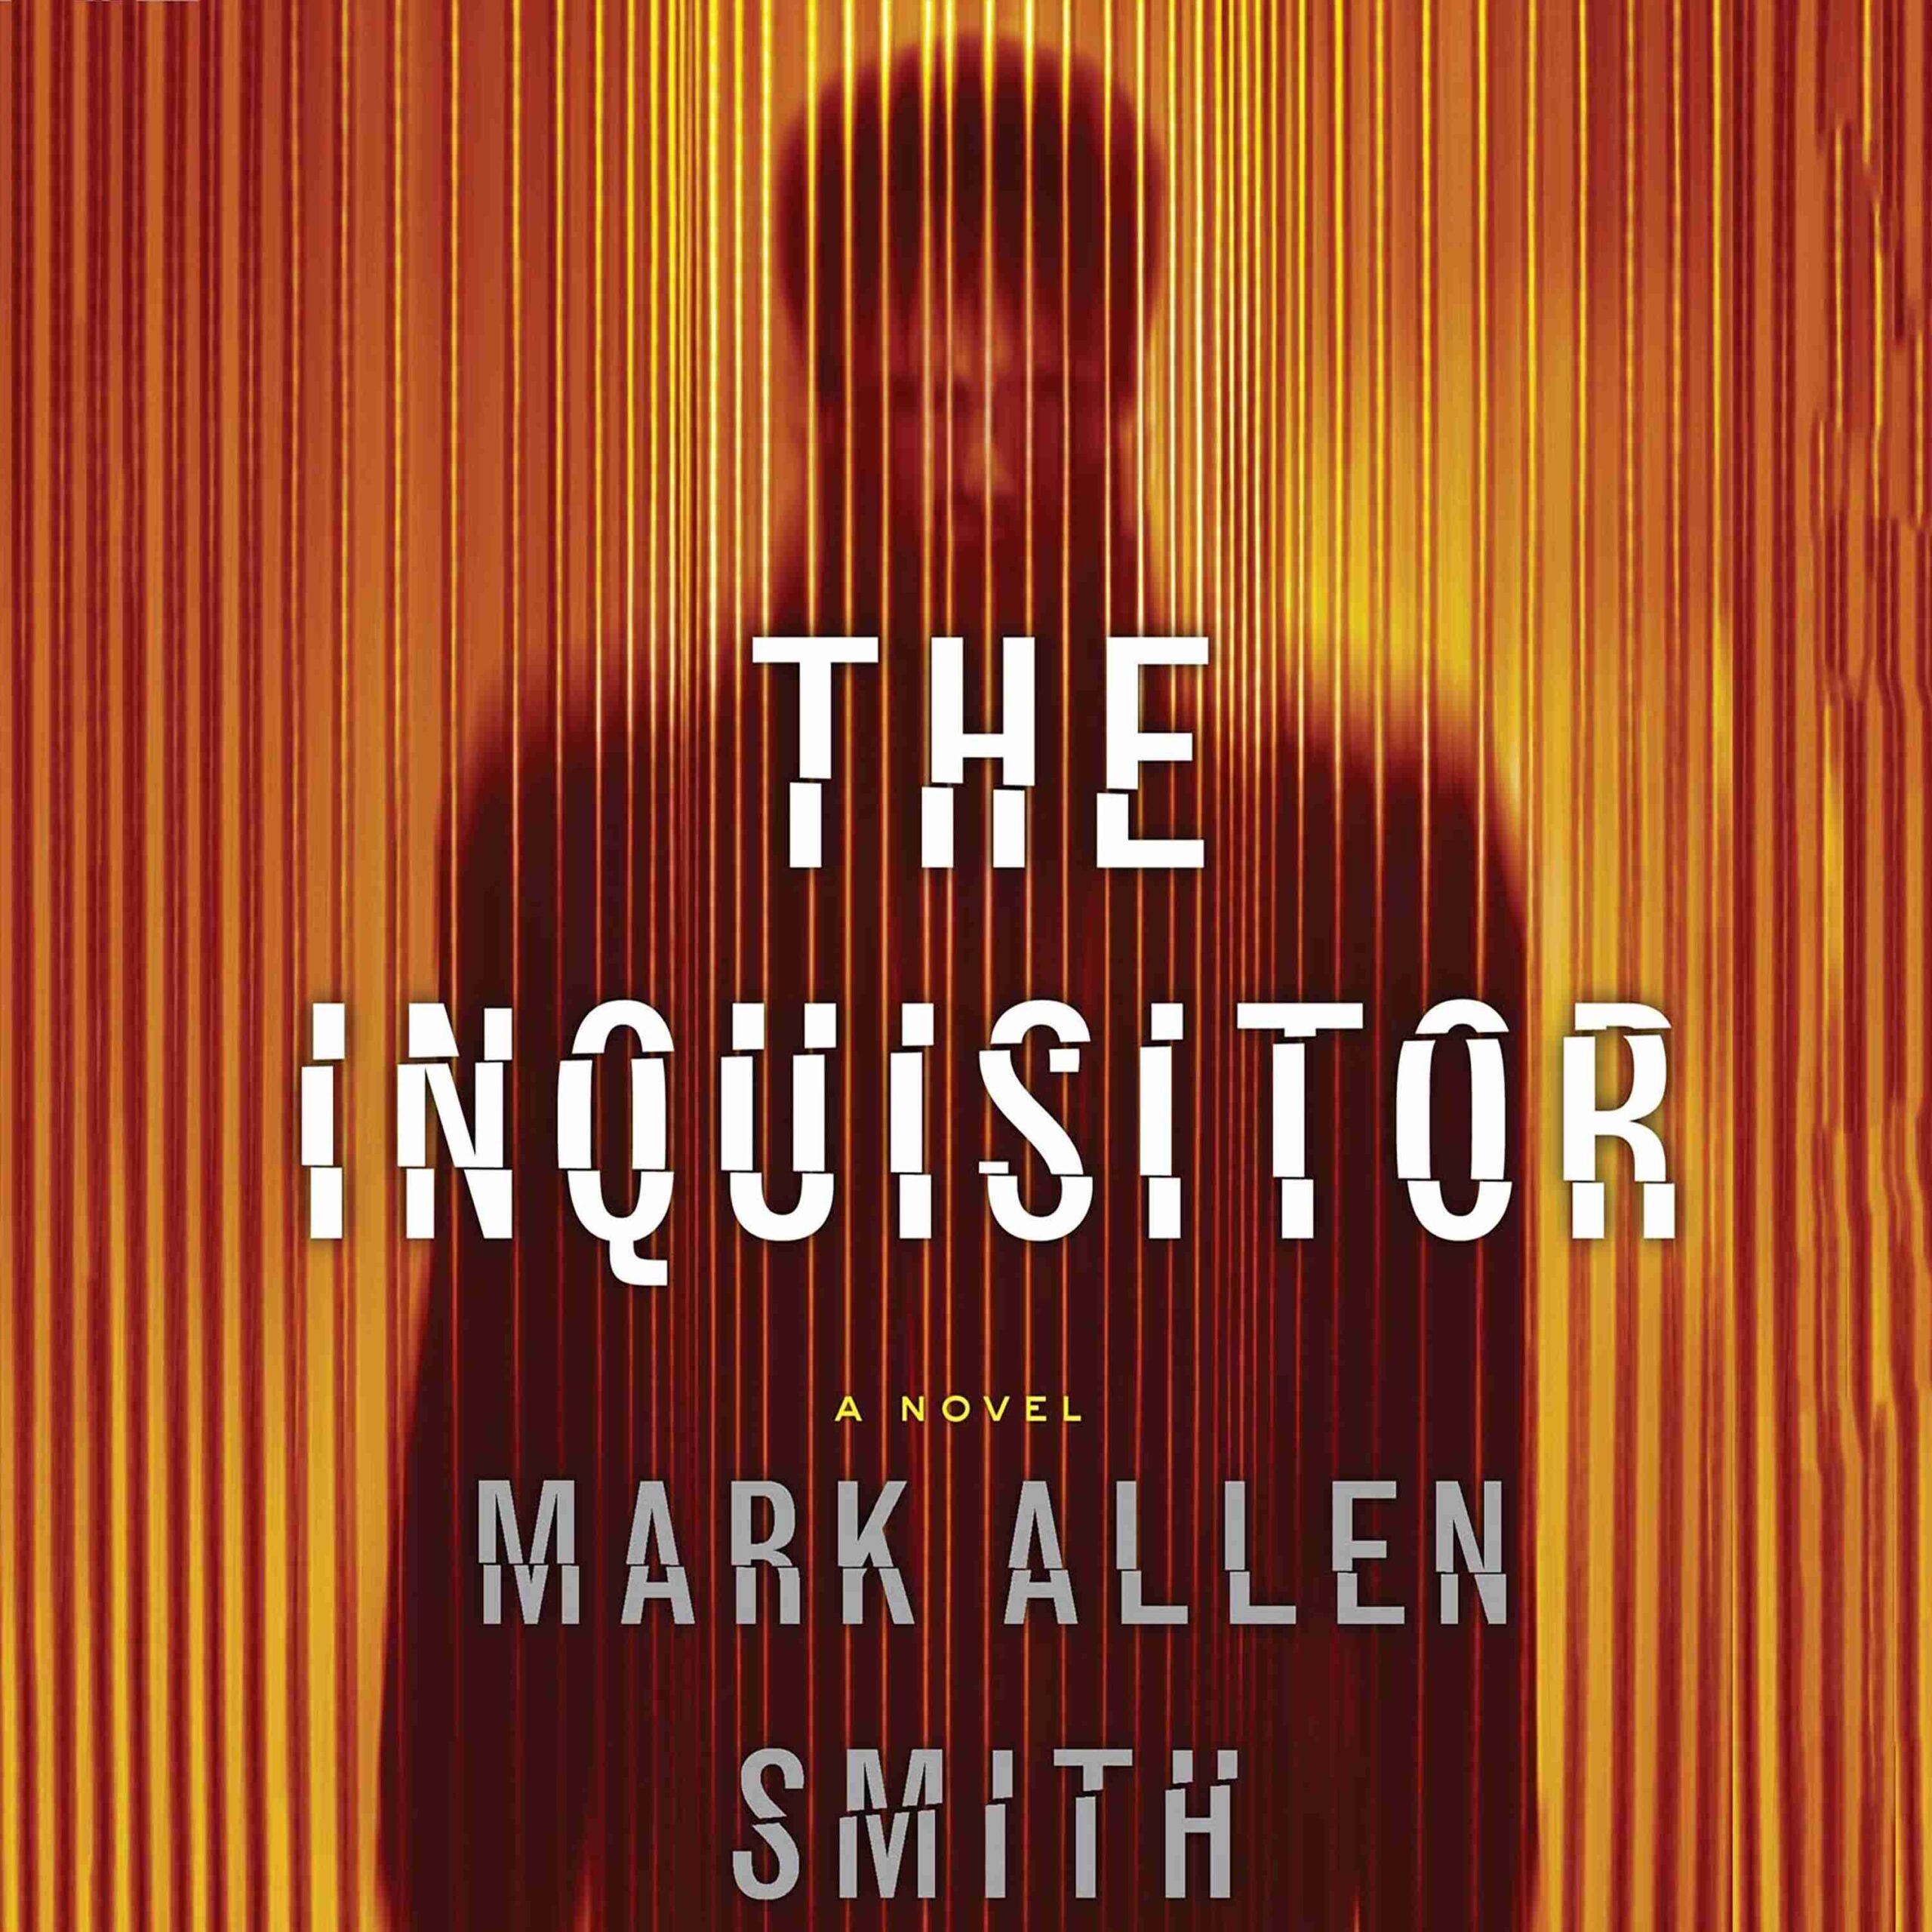 The Inquisitor byMark Allen Smith Audiobook. 19.99 USD